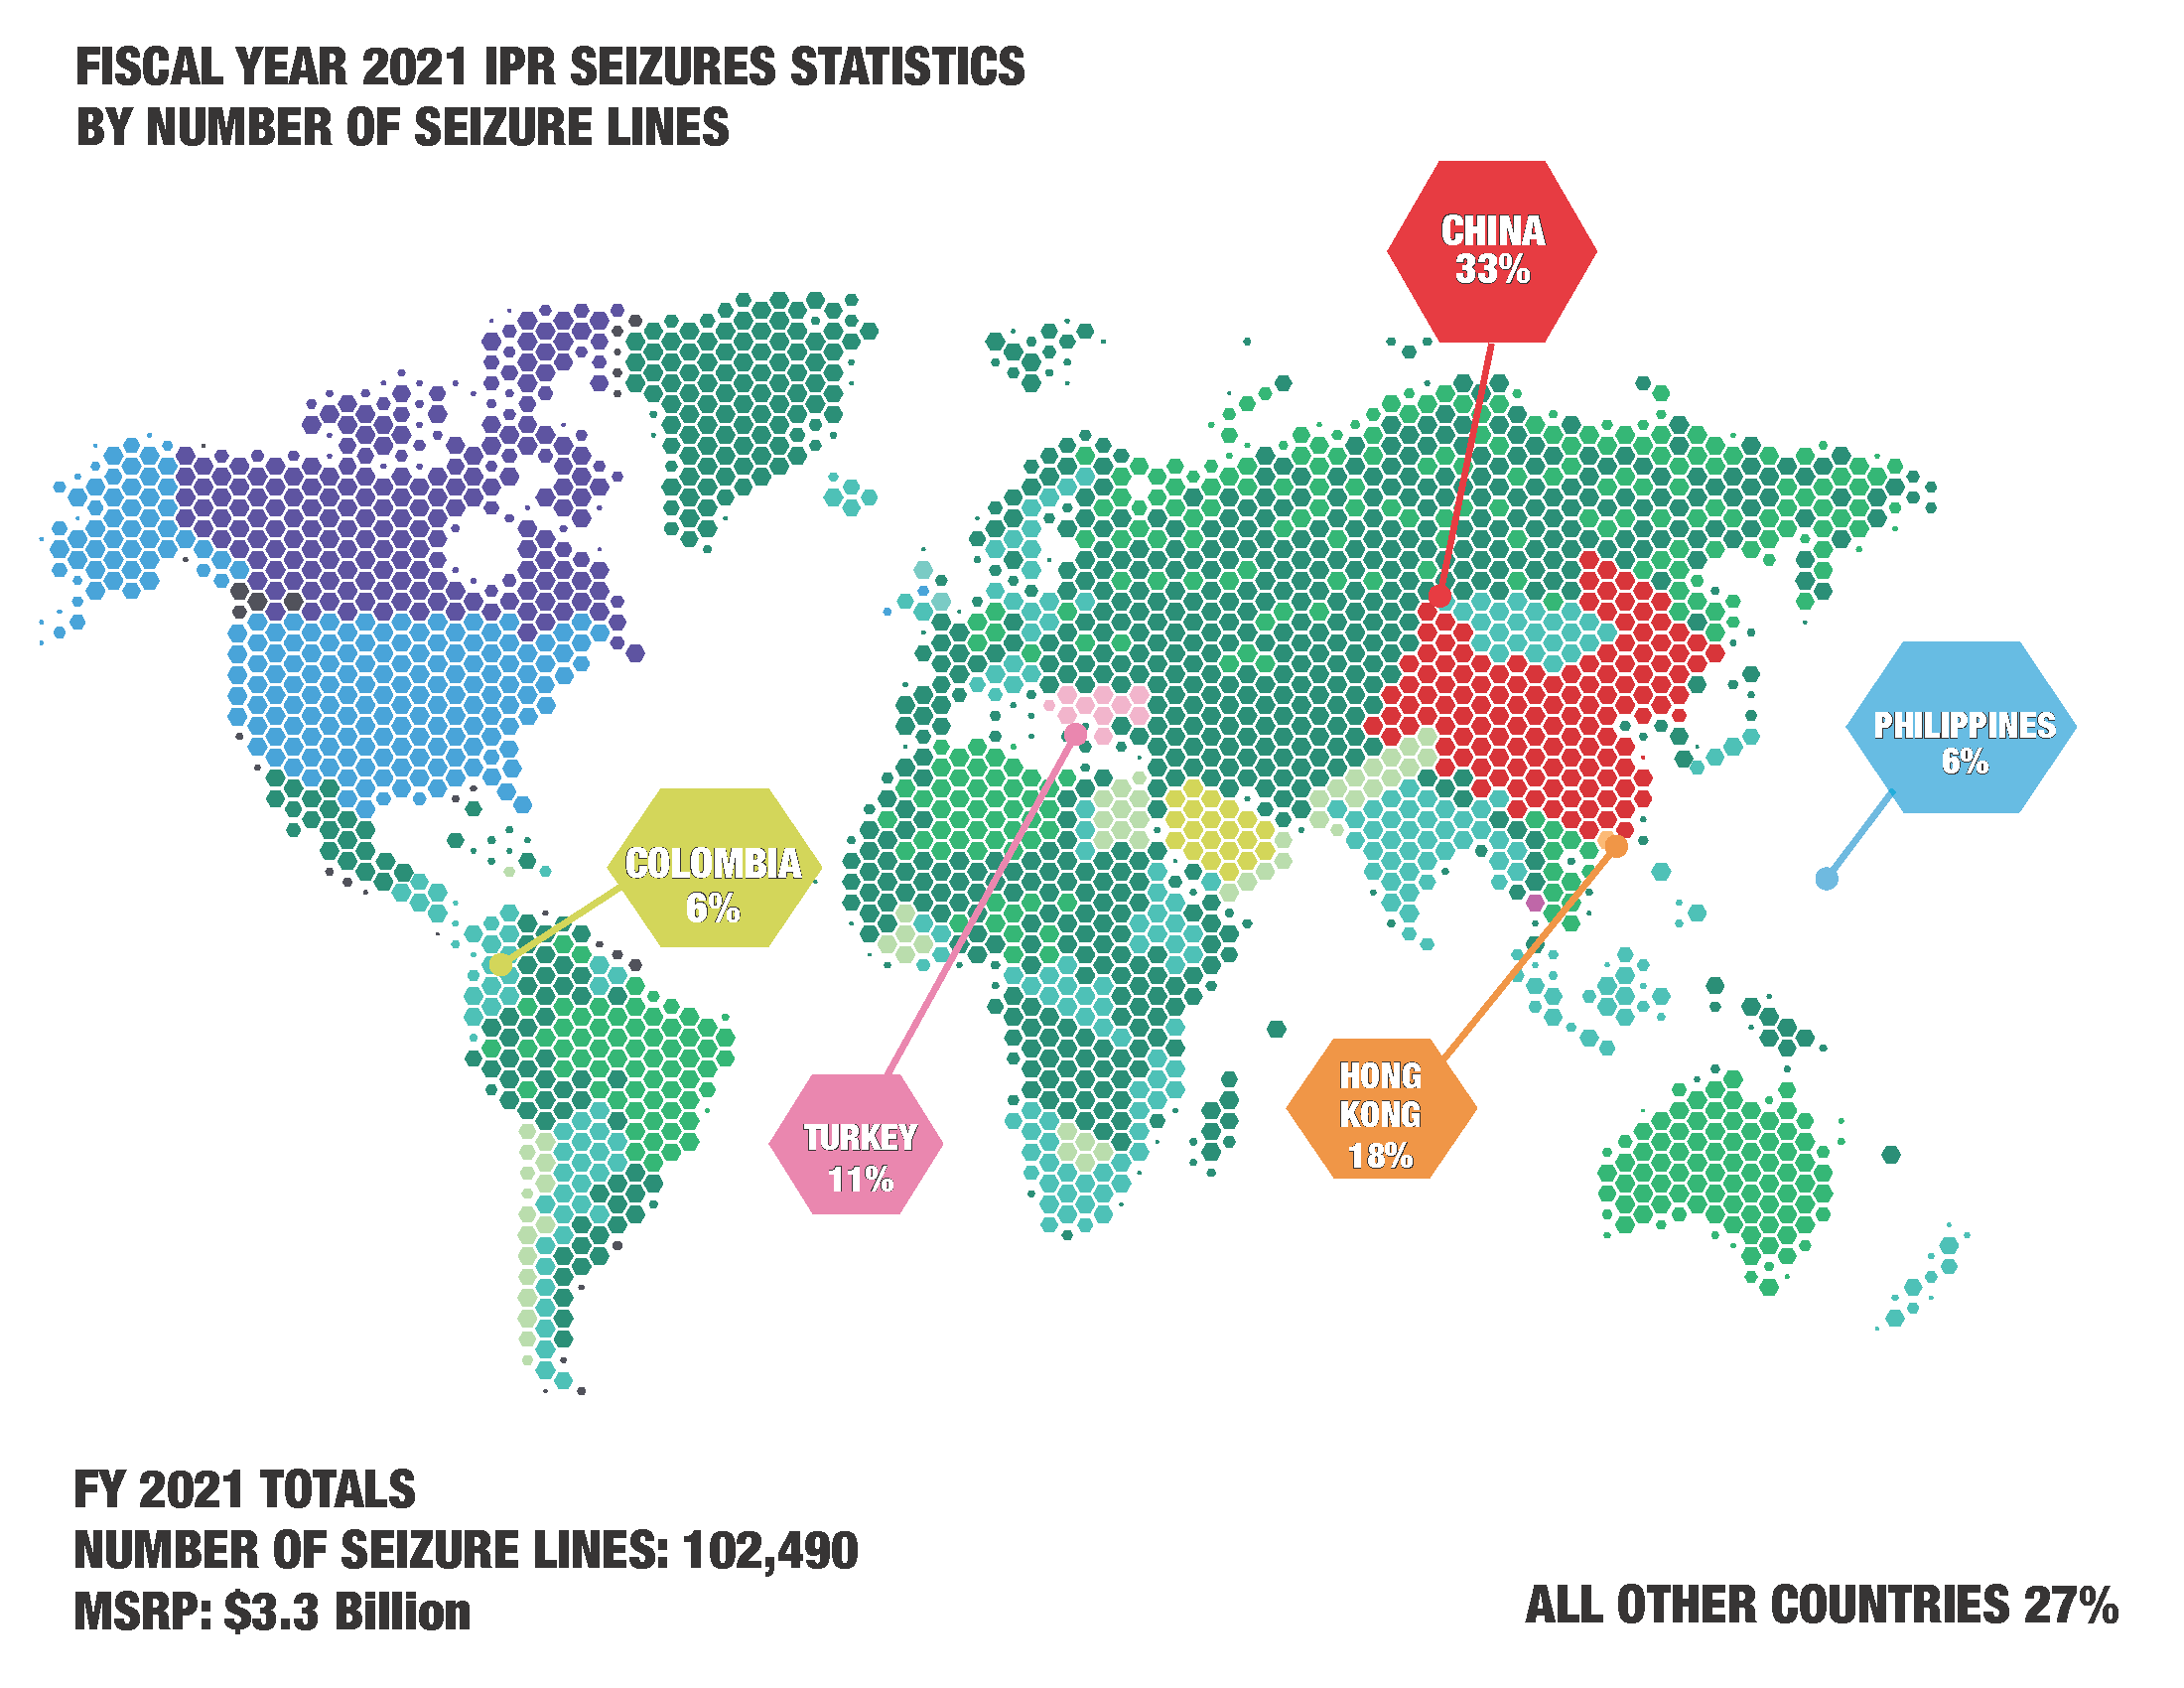 Image of a map. Fiscal Year 2021 IPR Seizure Statistics by Number of Seizure Lines. FY 2021 Totals – Number of Seizure lines: 102,490. MSRP: $3.3 Billion. Colombia, 6%; Turkey, 11%; China, 33%; Hong Kong, 18%, Philippines, 6%; All other countries, 27%